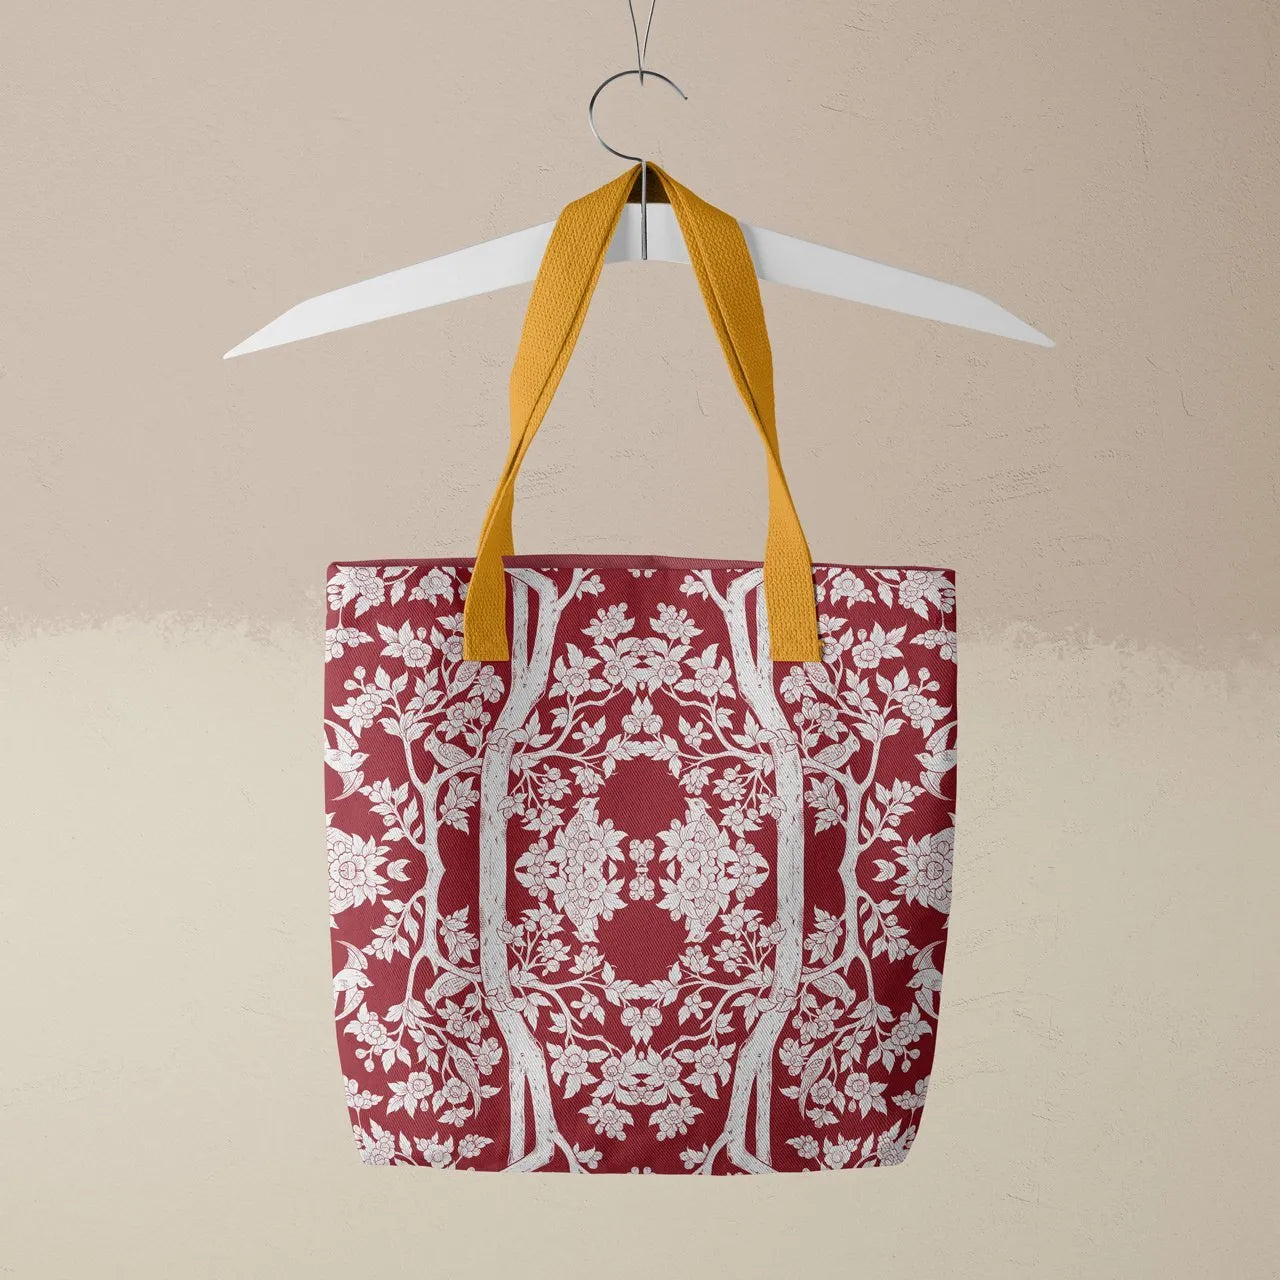 Aviary Tote - Rosella - Heavy Duty Reusable Grocery Bag - Yellow Handles - Tote Bags - Aesthetic Art